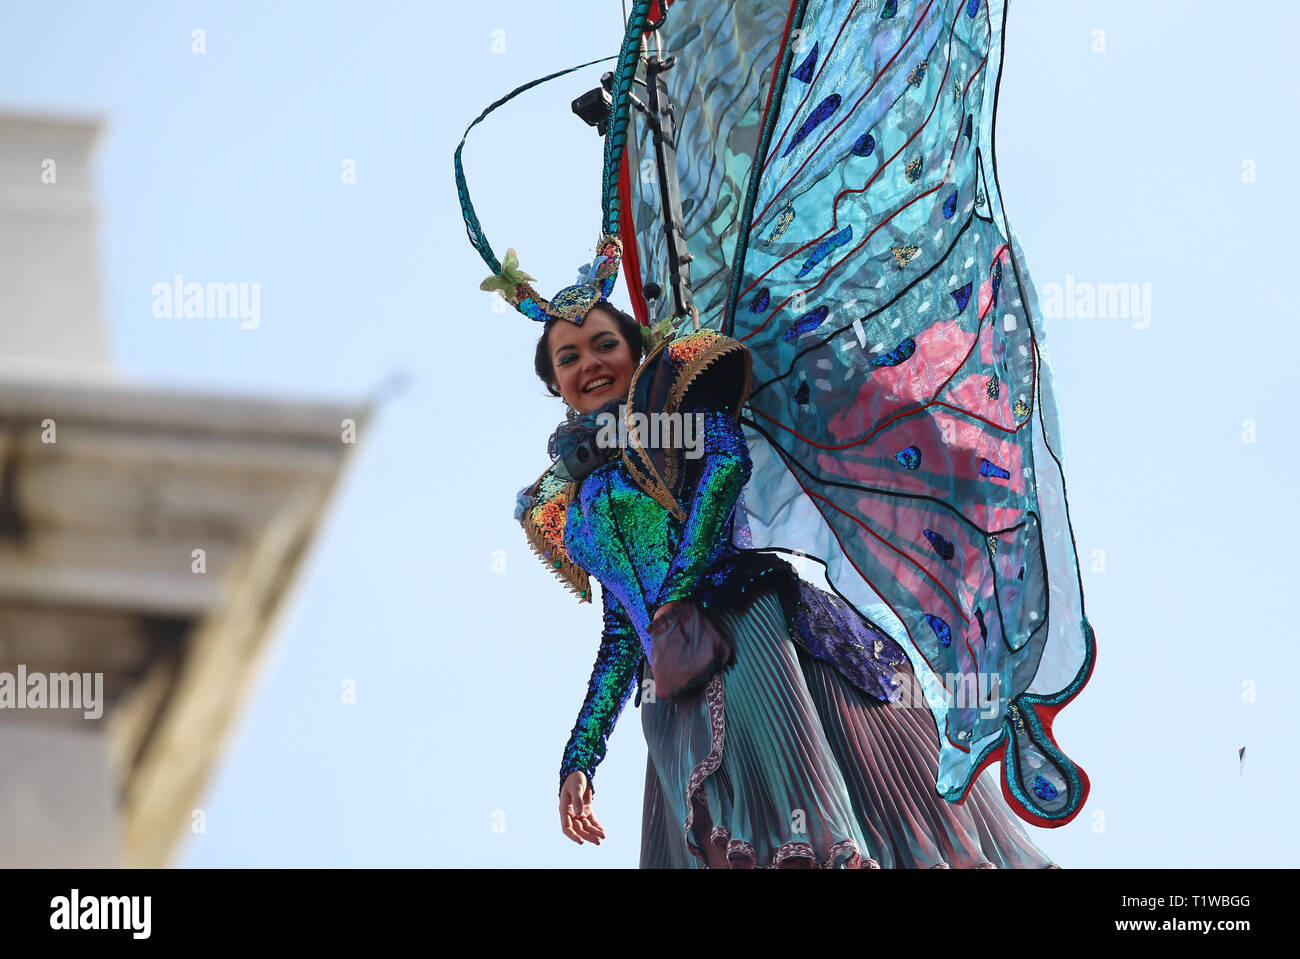 Flight of the Angel to Venice ahead of the Venice Carnival - Festa delle Marie in Venice  Where: Venice, Italy When: 16 Feb 2019 Credit: IPA/WENN.com  **Only available for publication in UK, USA, Germany, Austria, Switzerland** Stock Photo